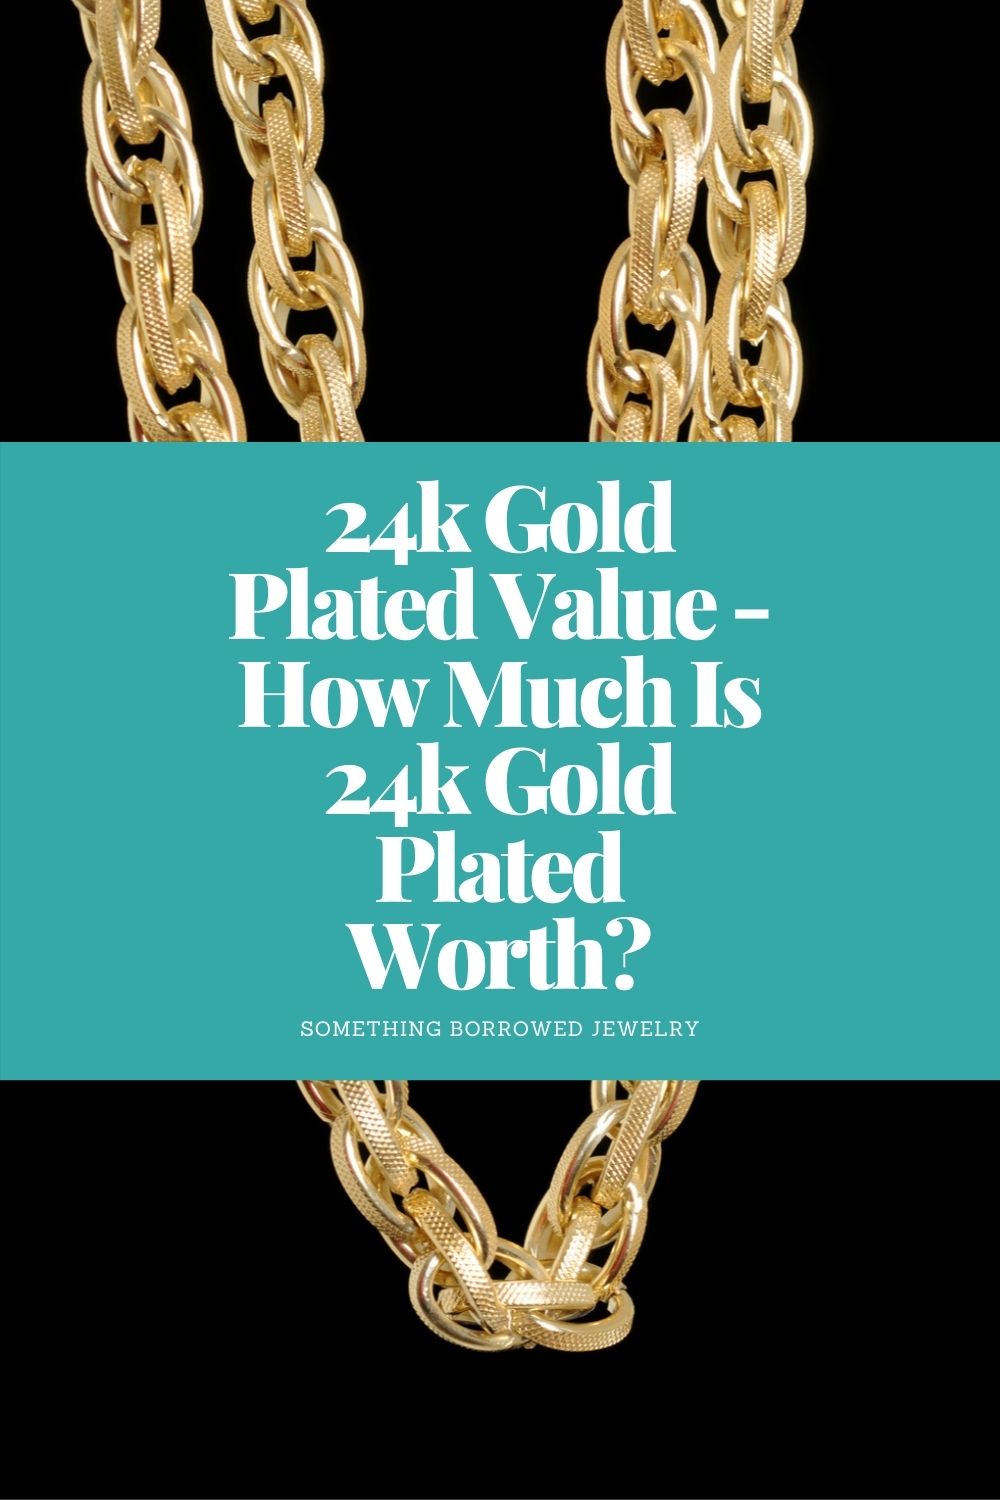 24k Gold Plated Value - How Much Is 24k Gold Plated Worth pin